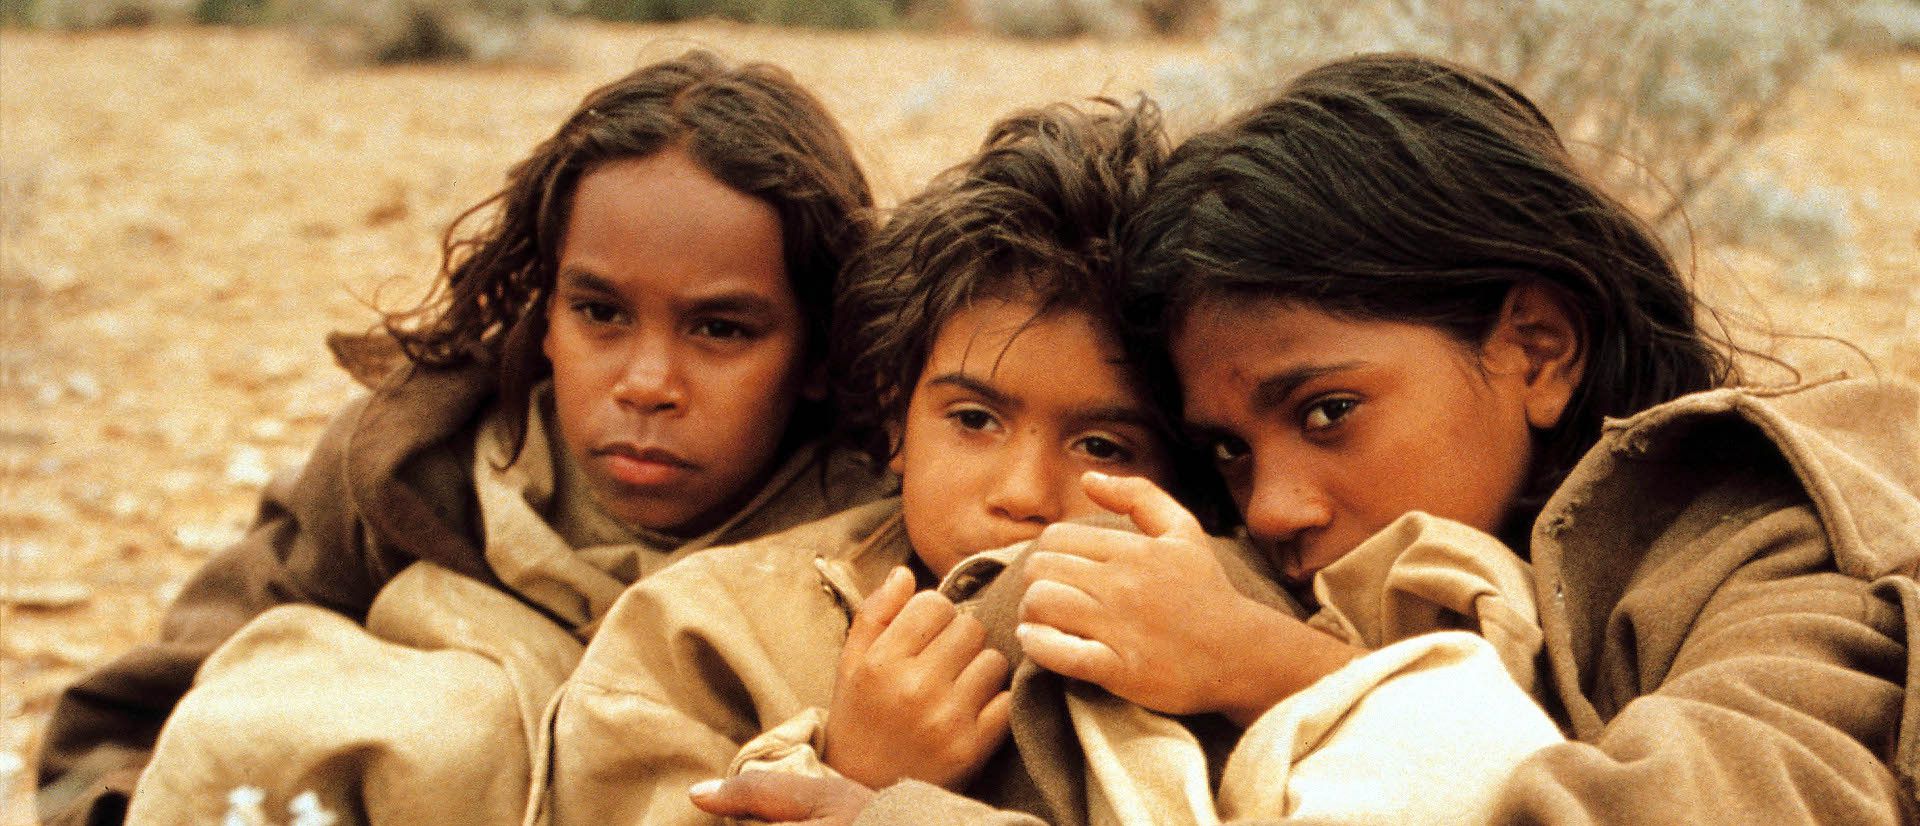 Everlyn Sampi, Tianna Sansbury and Laura Monaghan in Rabbit-Proof Fence